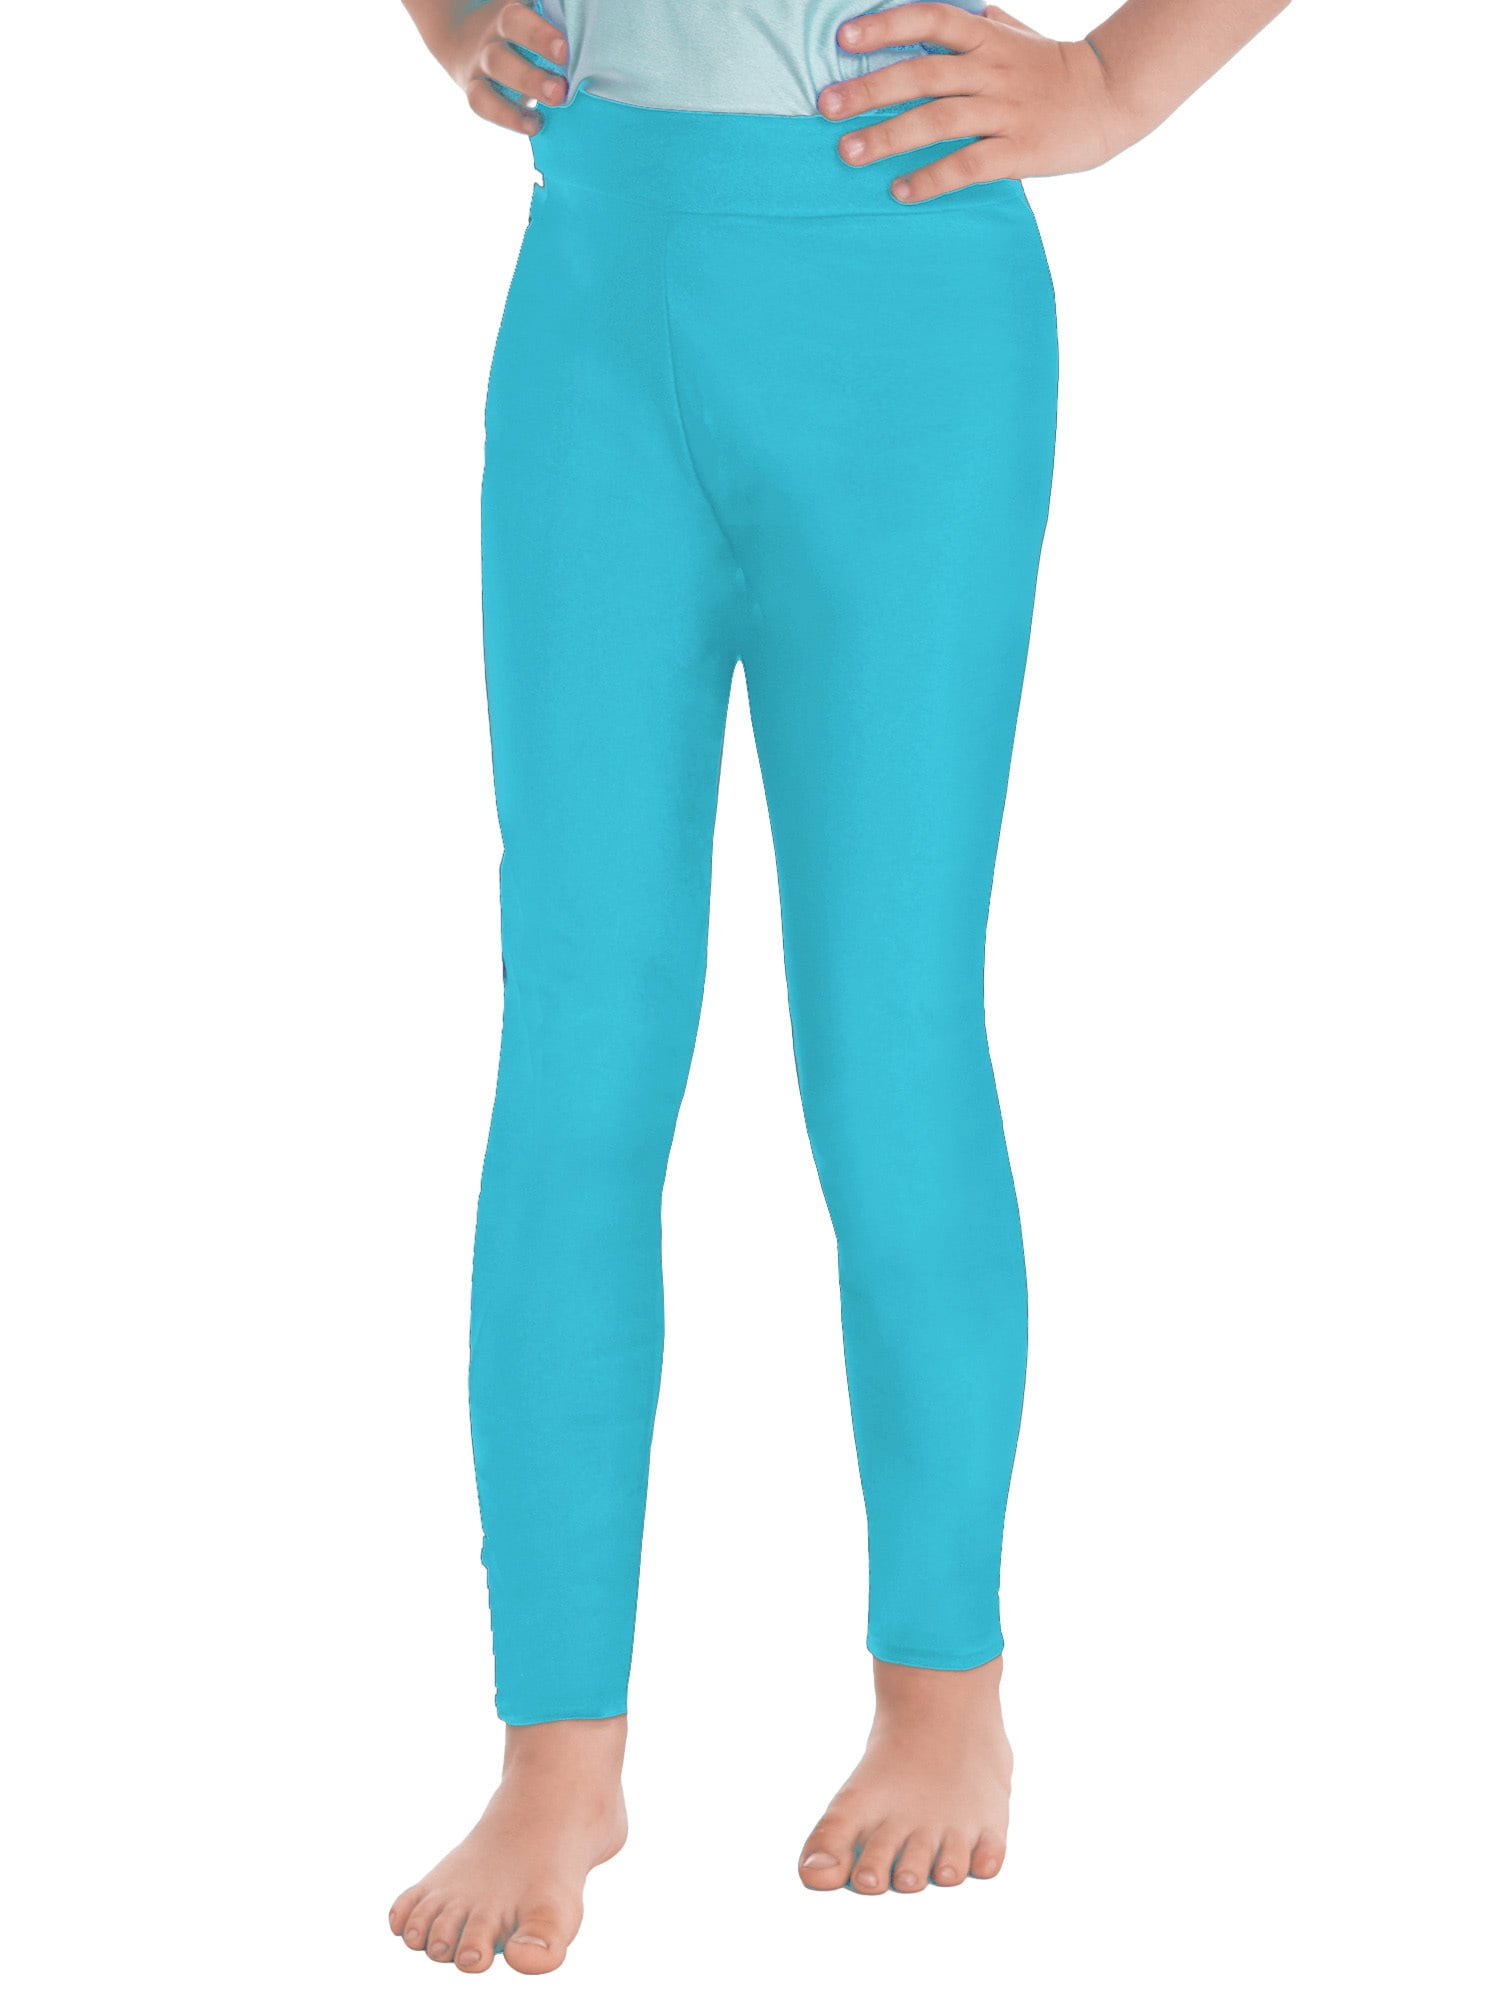 Rainbow Gradient Danskin Petite Yoga Pants For Women 2018 Active Outfit In  Sizes S XL Sports Leggings For Dance And Fitness 8416570 X0912 From Dafu01,  $9.12